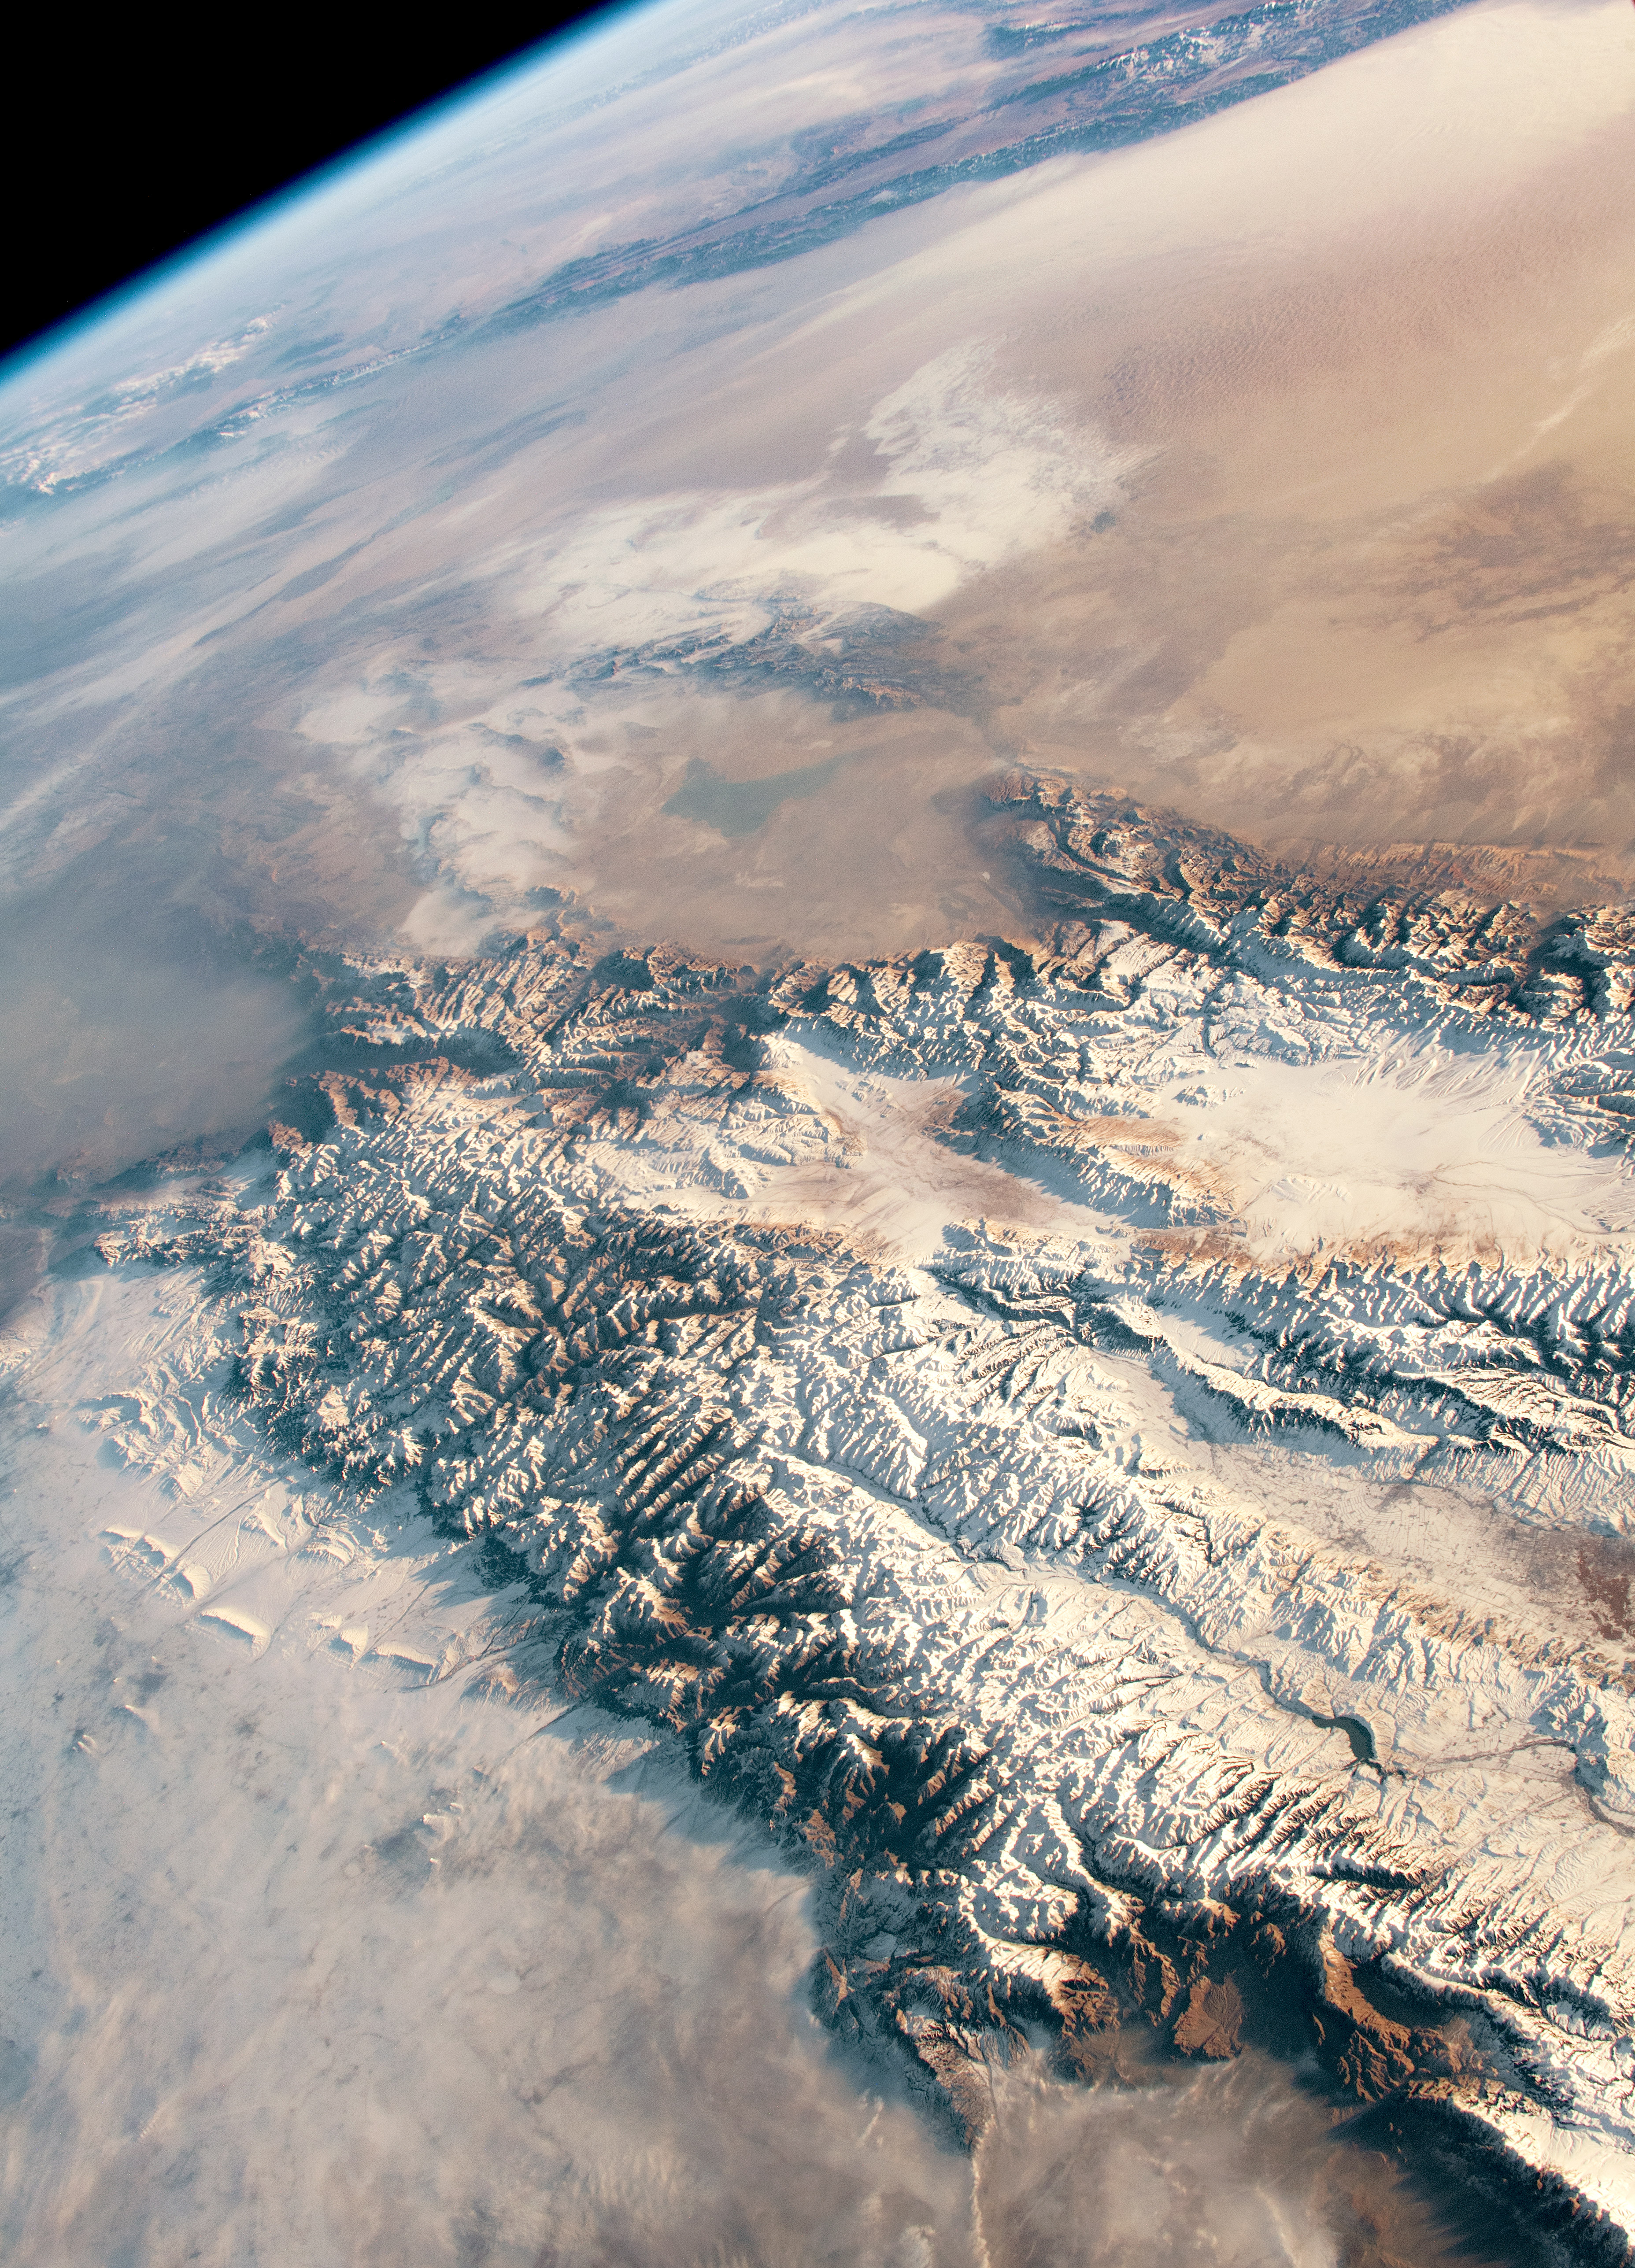 Snow and Sand in Central Asia - related image preview